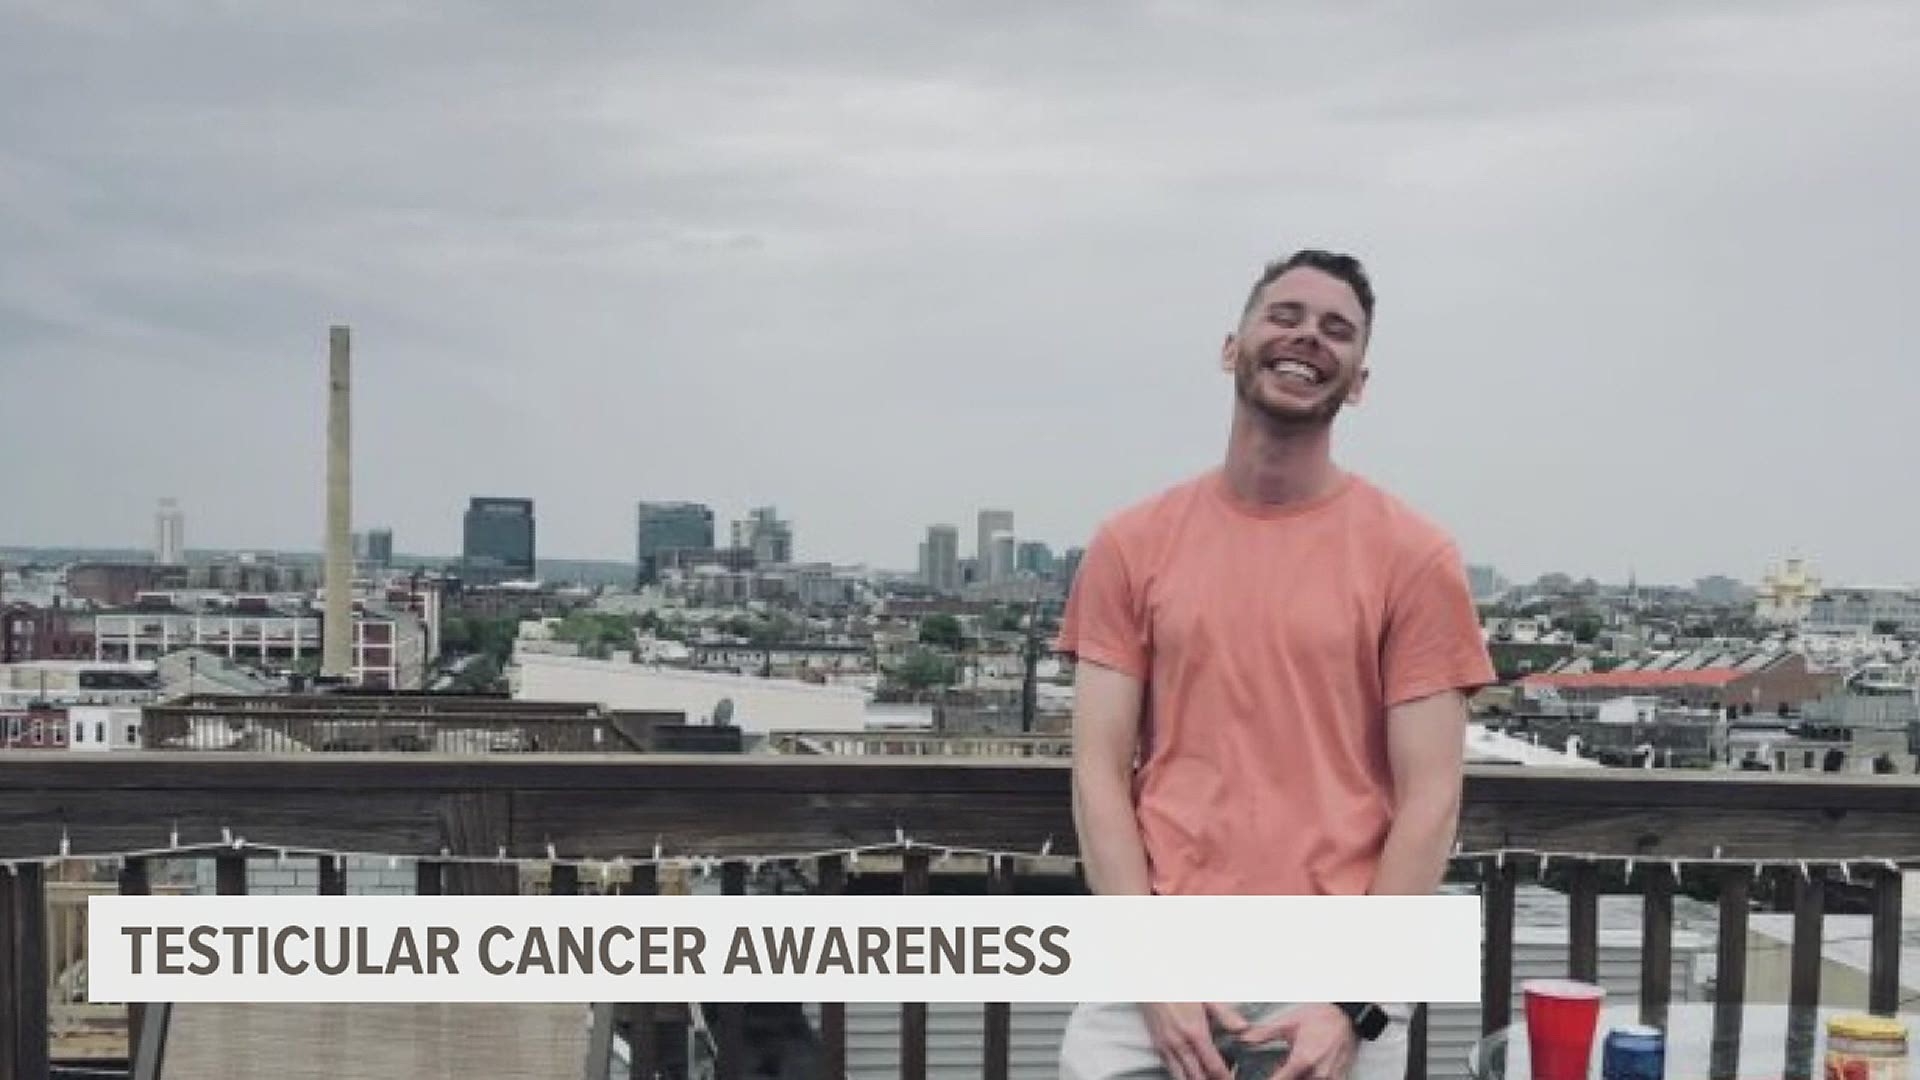 Friends of Alex Bartlett continue his mission to educate and spread awareness about the cancer after his death.